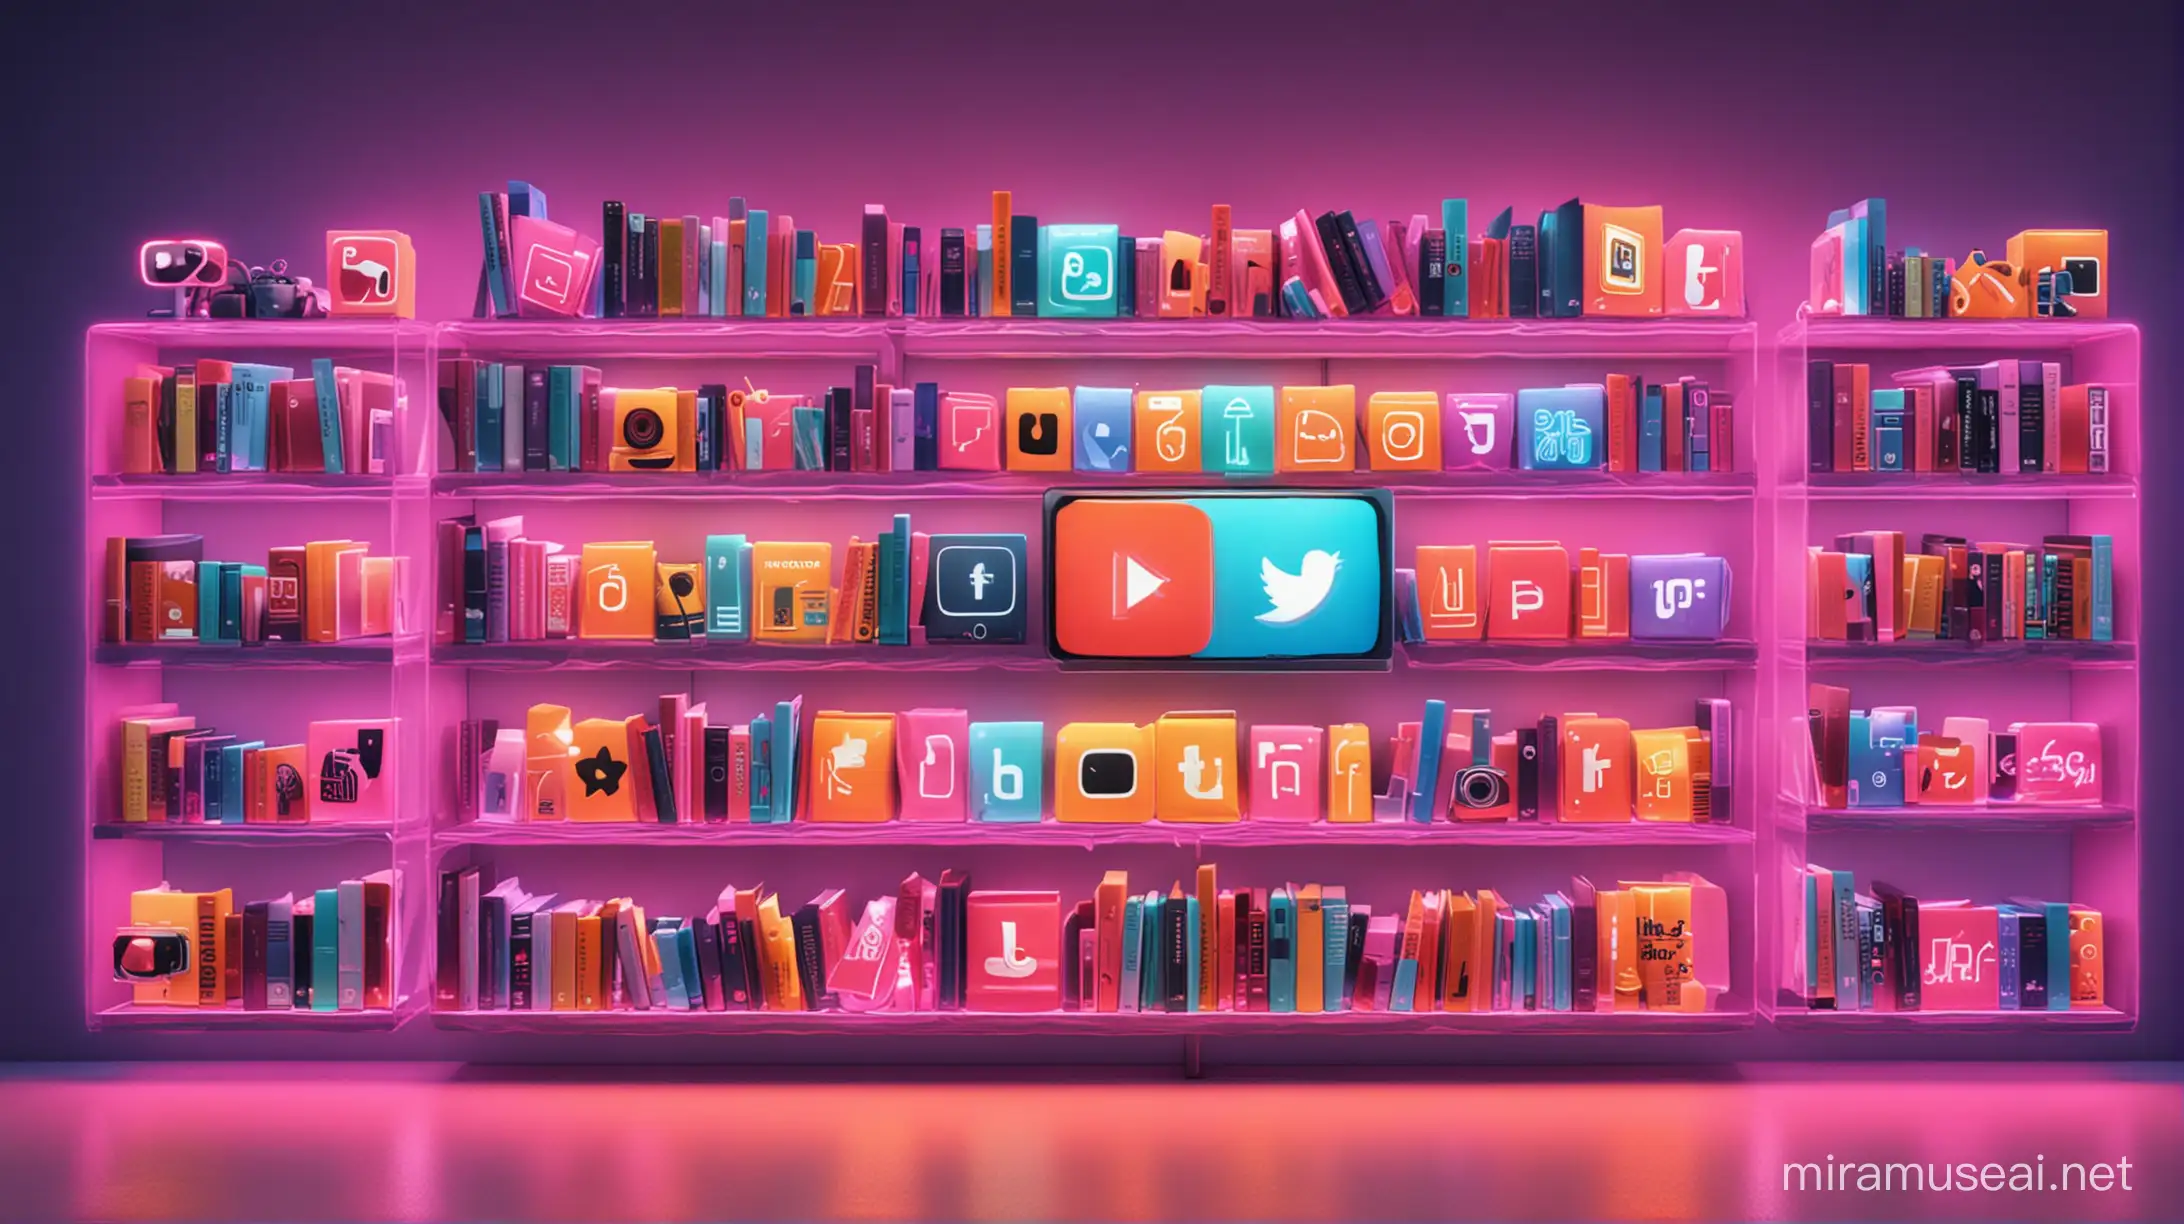 Neon Library Shelf Overflowing with Social Media Icons